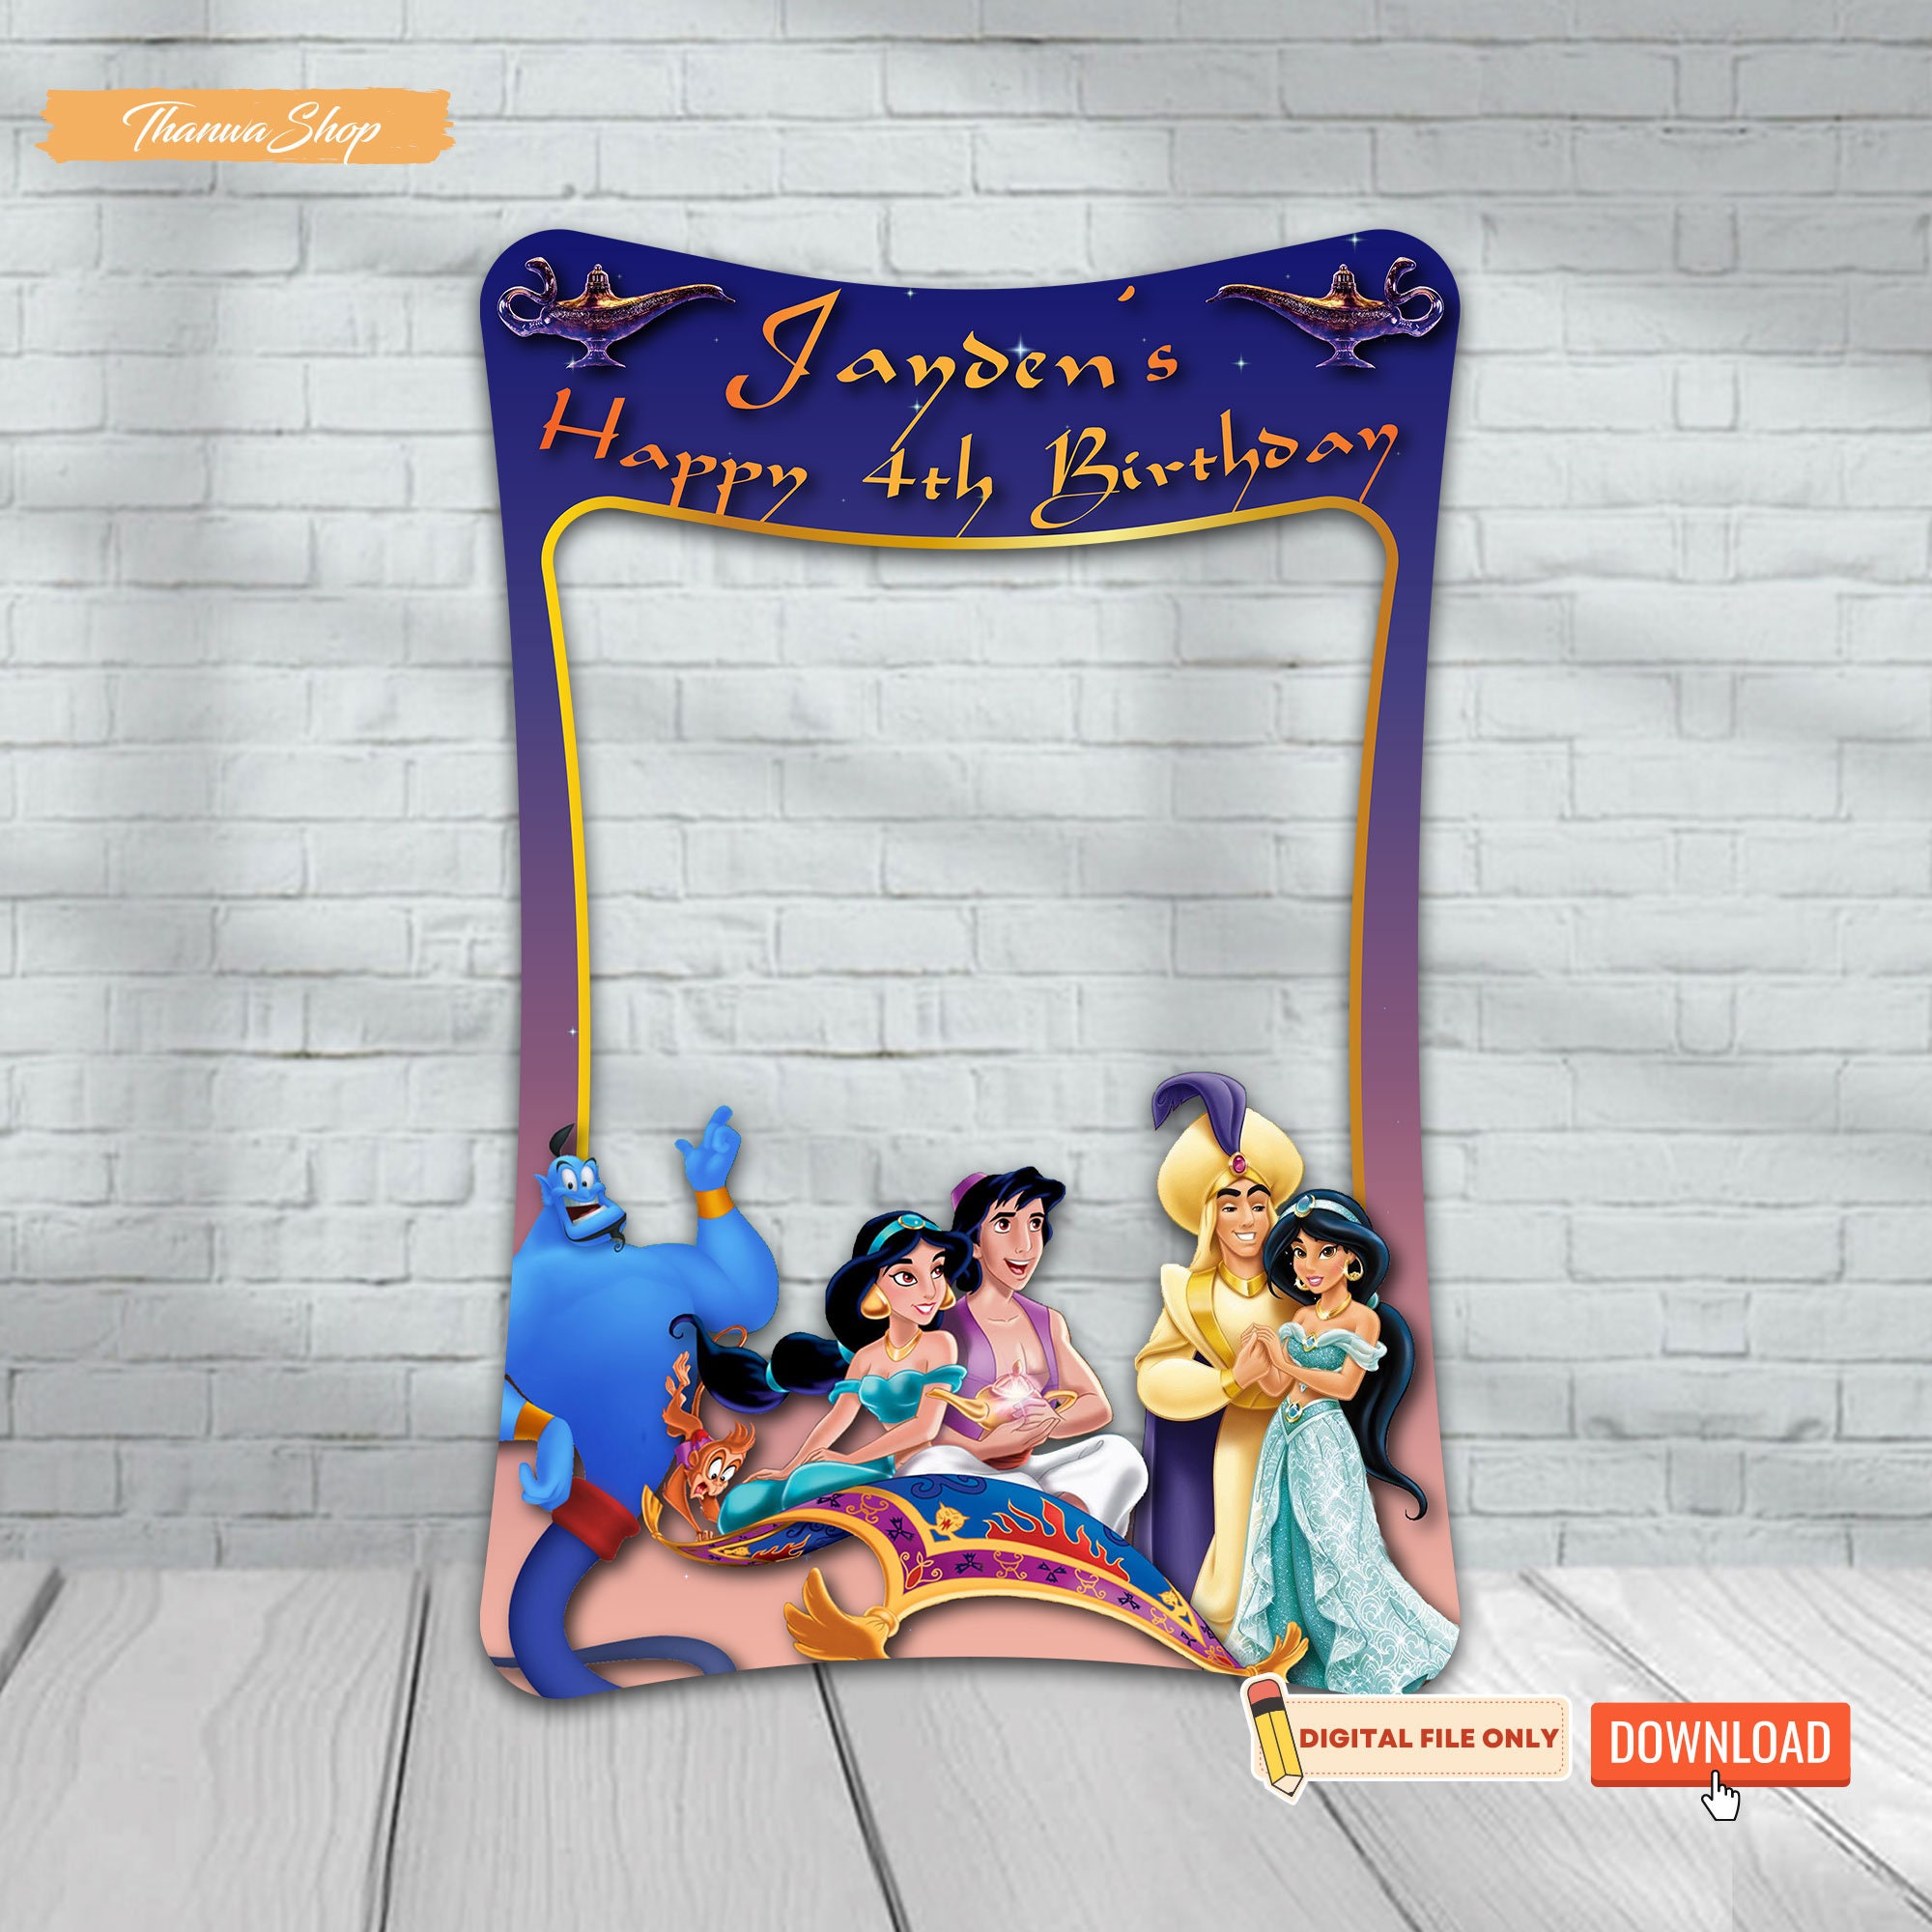 Aladdin - Great Gift Ideas that won't break budget! Review